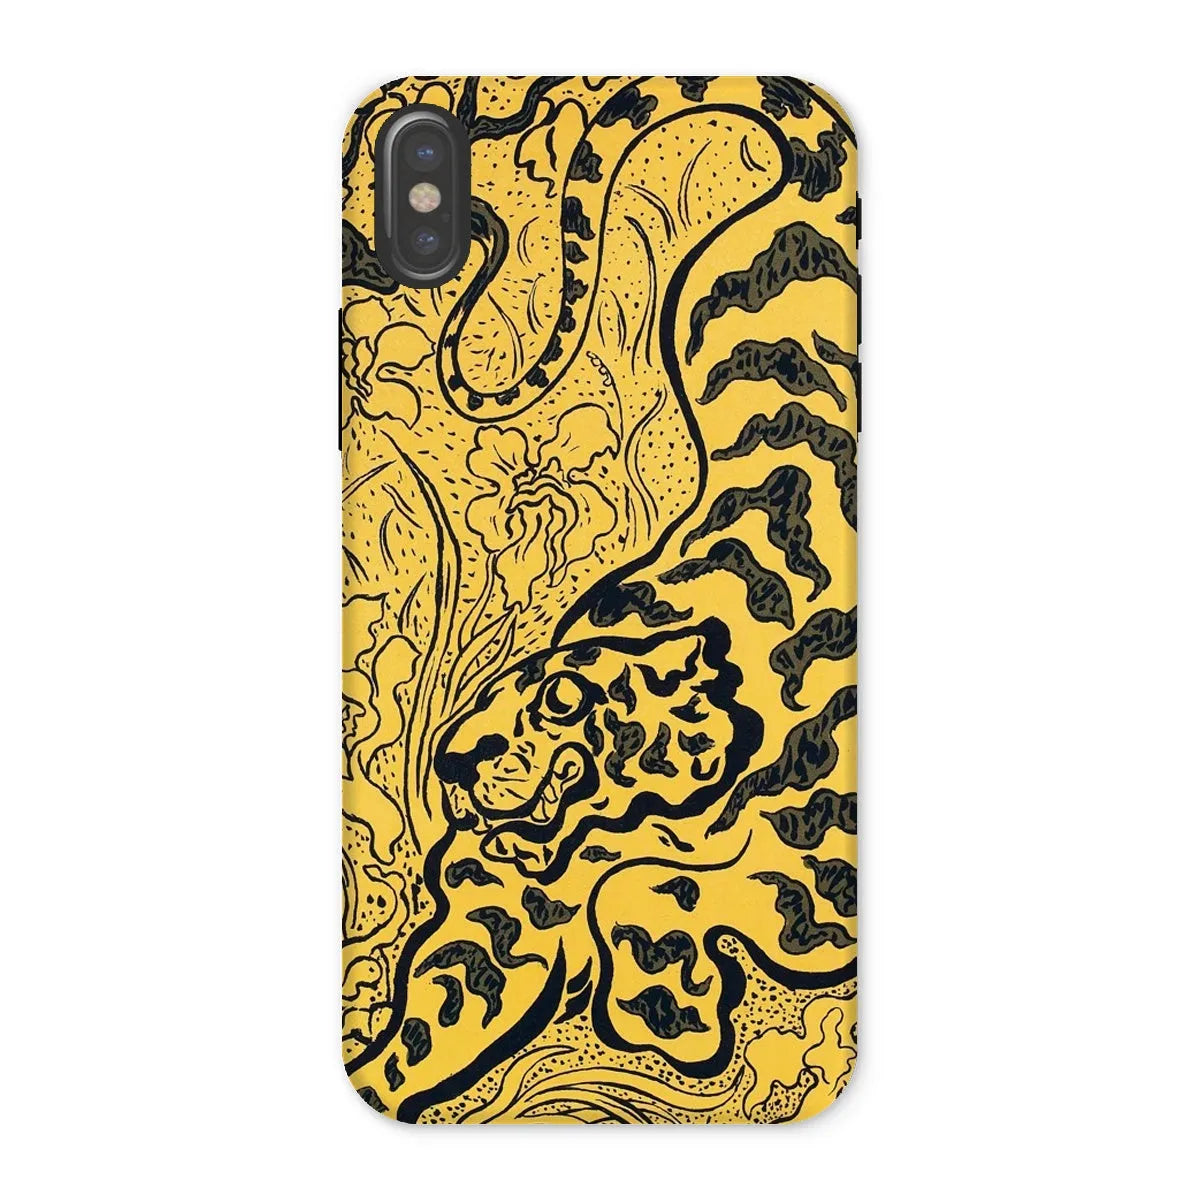 Tiger In The Jungle - Graphic Art Phone Case - Paul Ranson - Iphone x / Matte - Mobile Phone Cases - Aesthetic Art